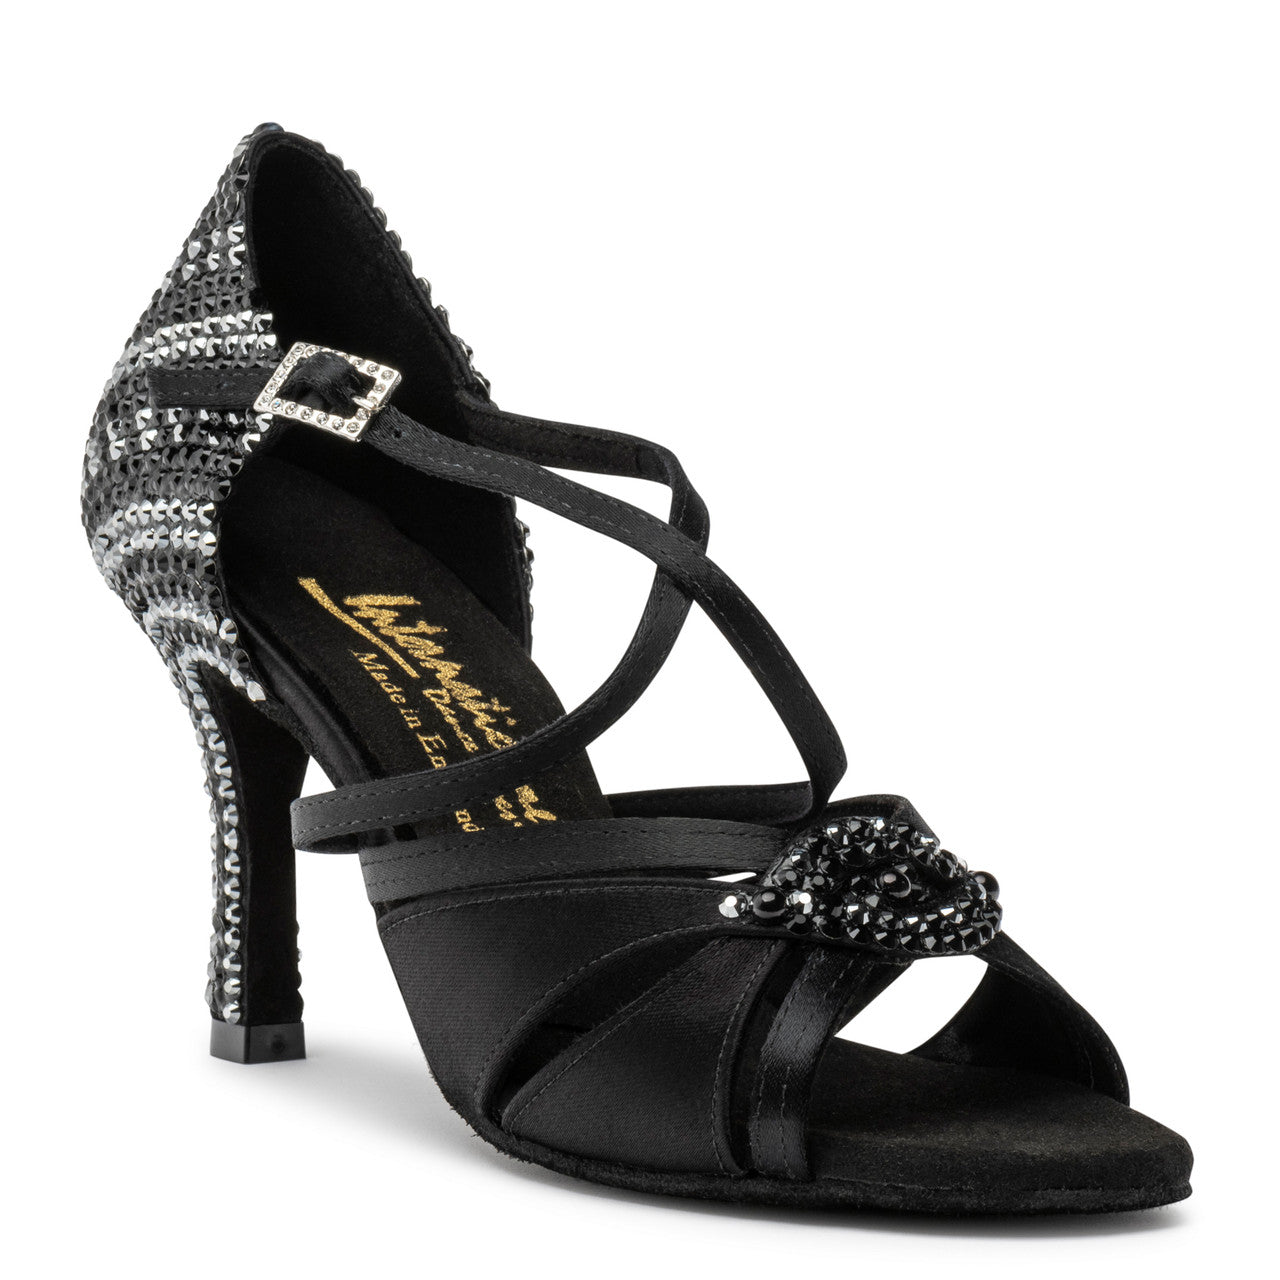 International Dance Shoes IDS Black Satin Mia by Lauren Latin Shoe Covered in Jet Preciosa Crystals